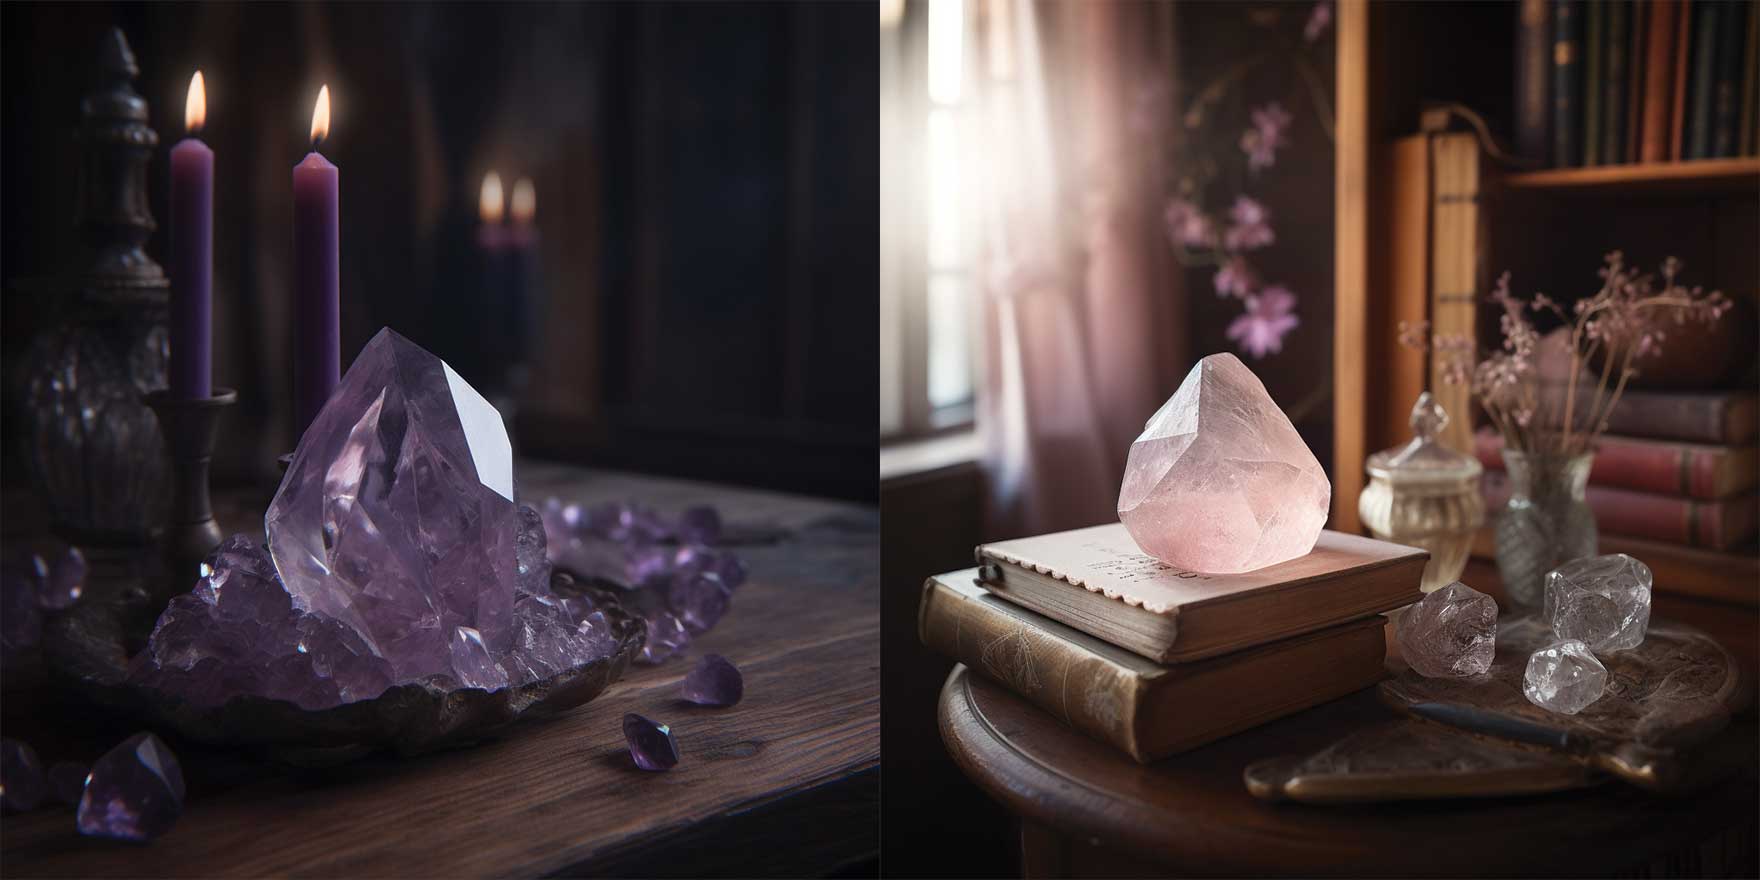 An amethyst crystal on the left and rose quartz crystal on the right